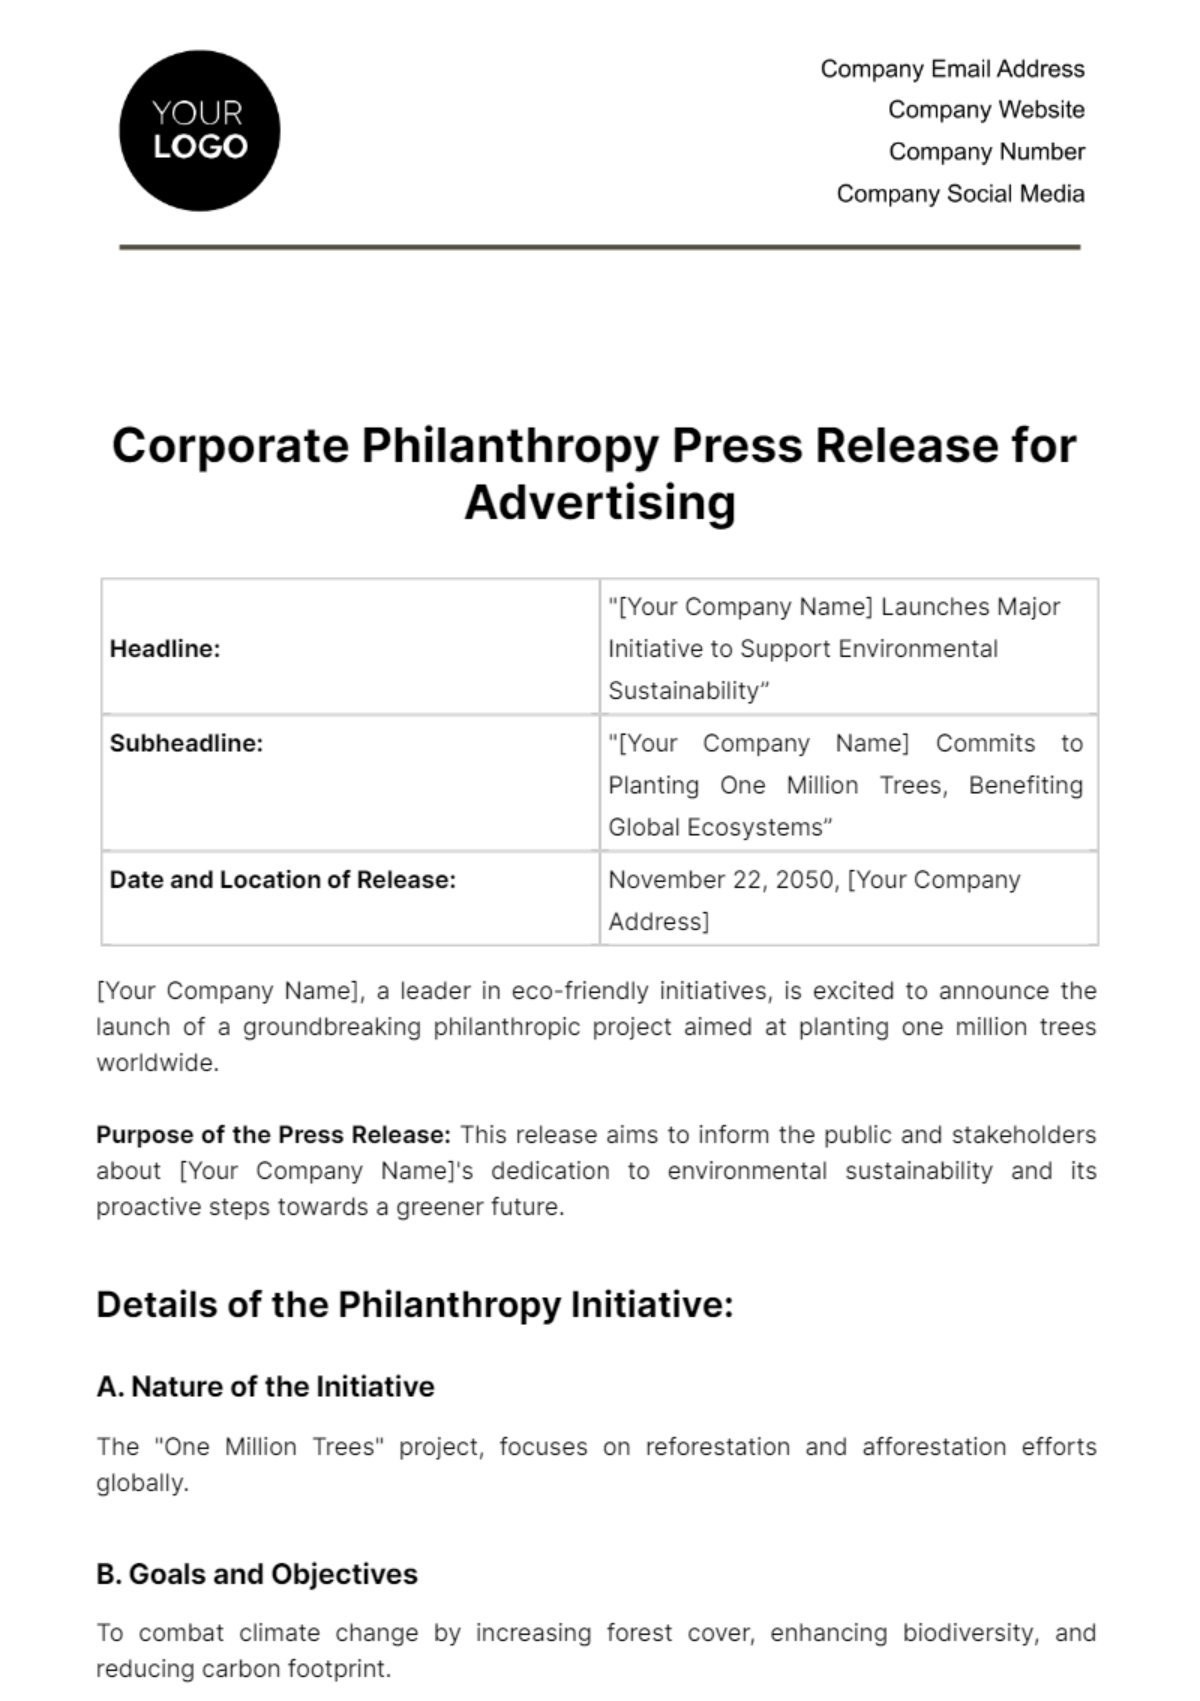 Free Corporate Philanthropy Press Release for Advertising Template